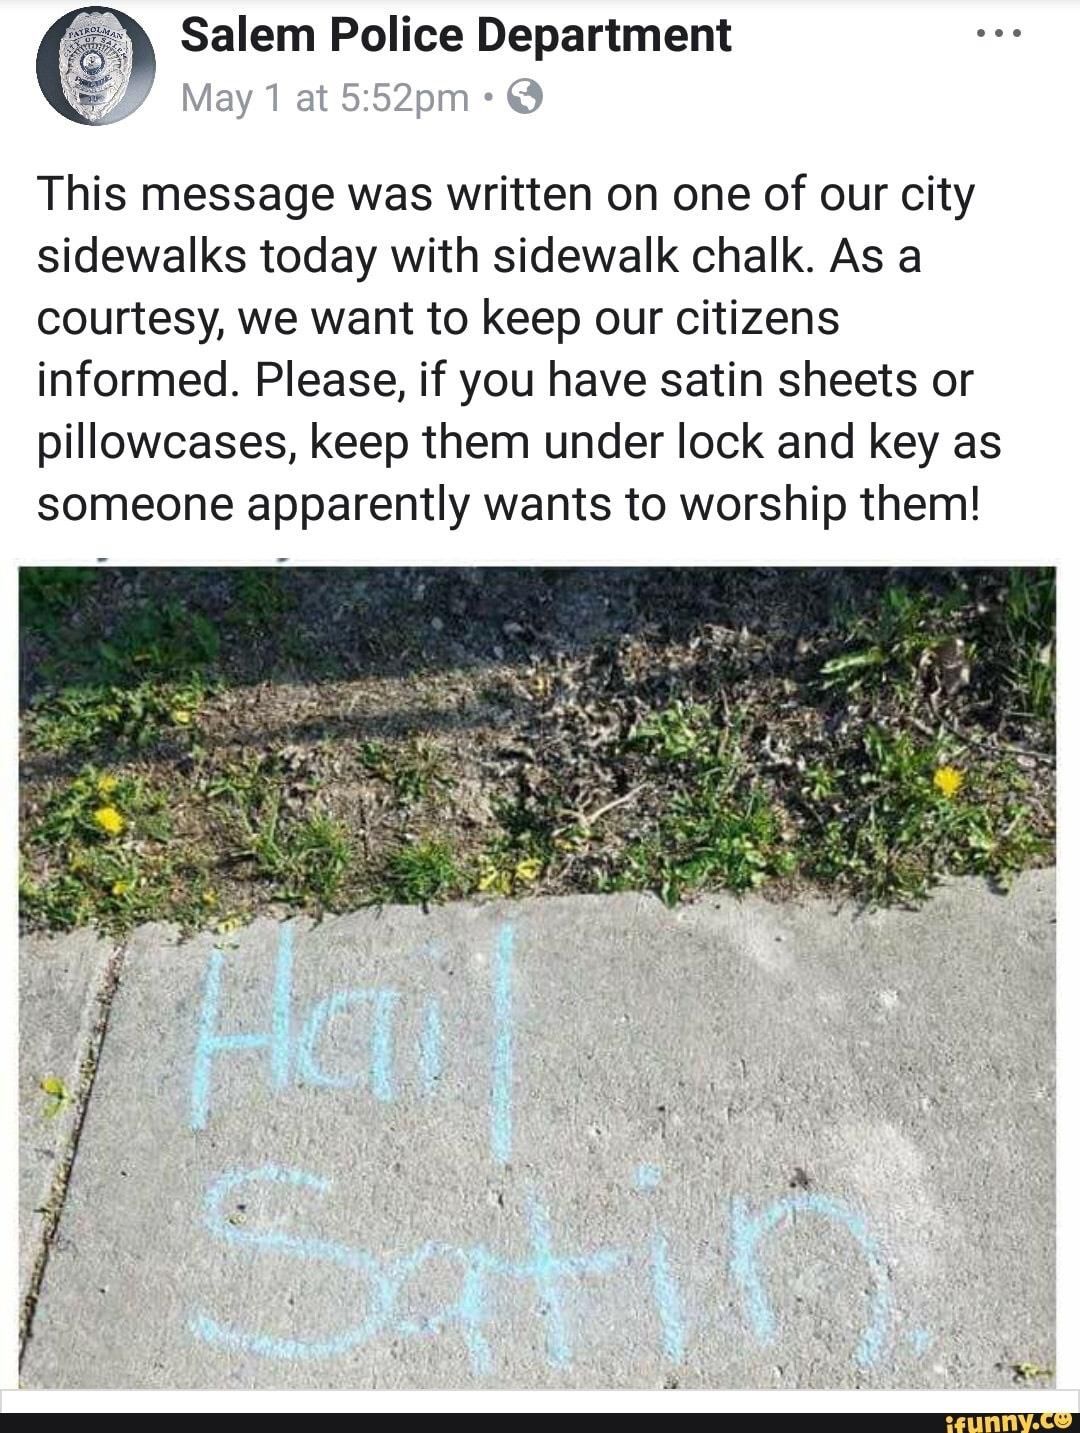 Some kids in my hometown are really cotton some pagan practices.